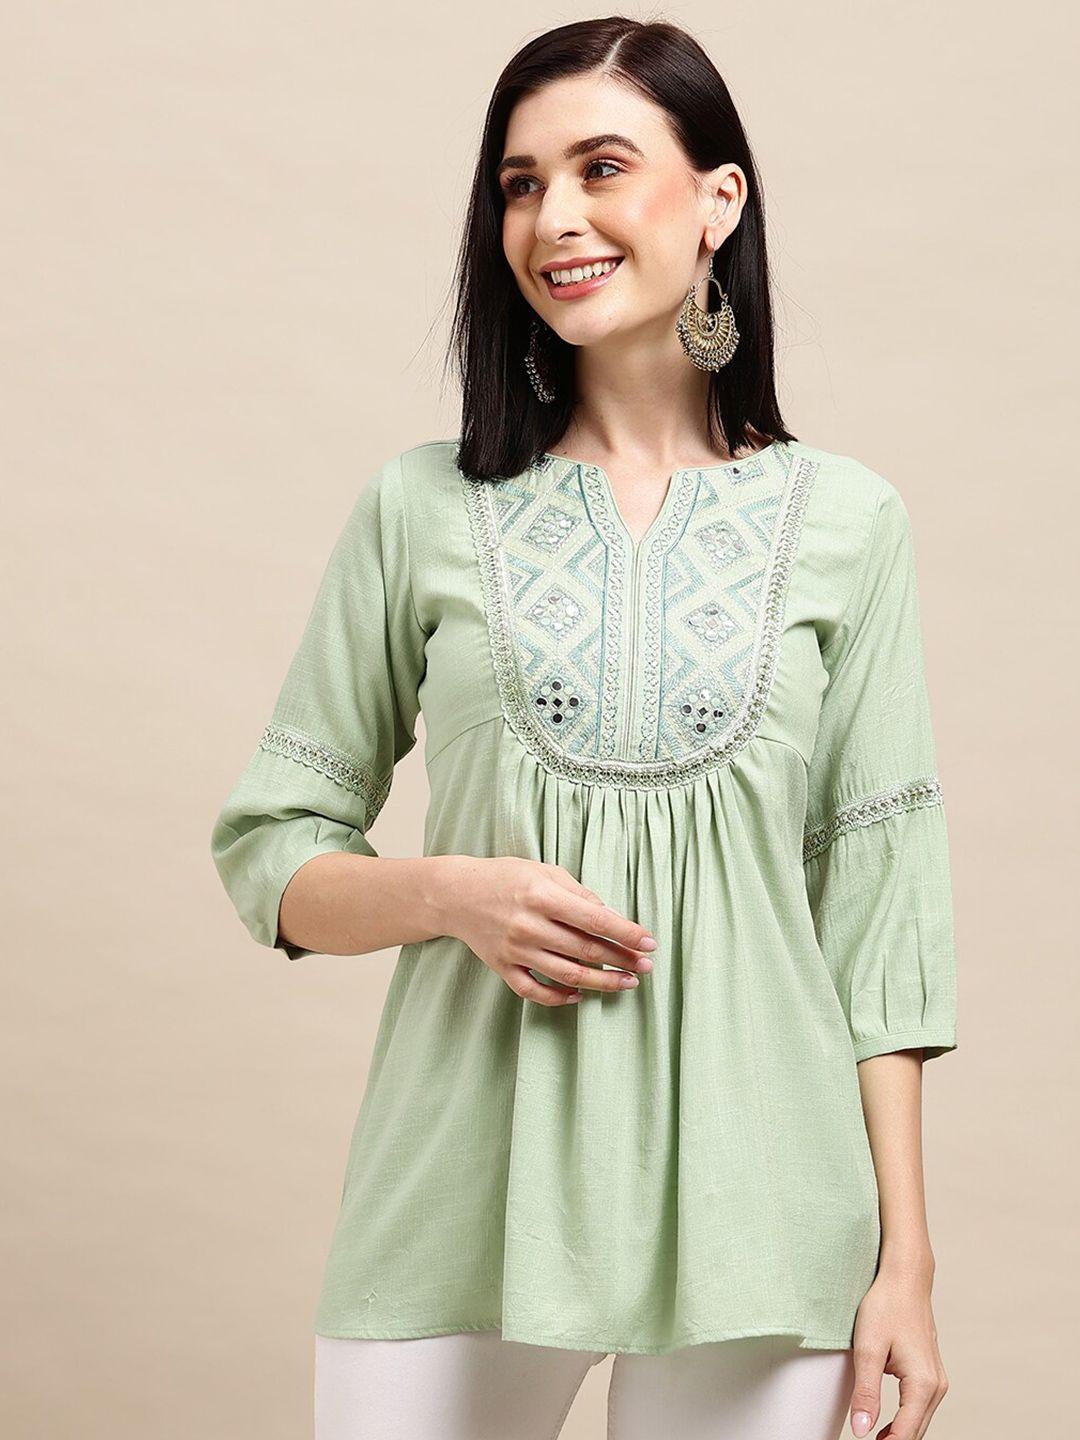 sangria sea green ethnic motifs embroidered round notched neck a-line top